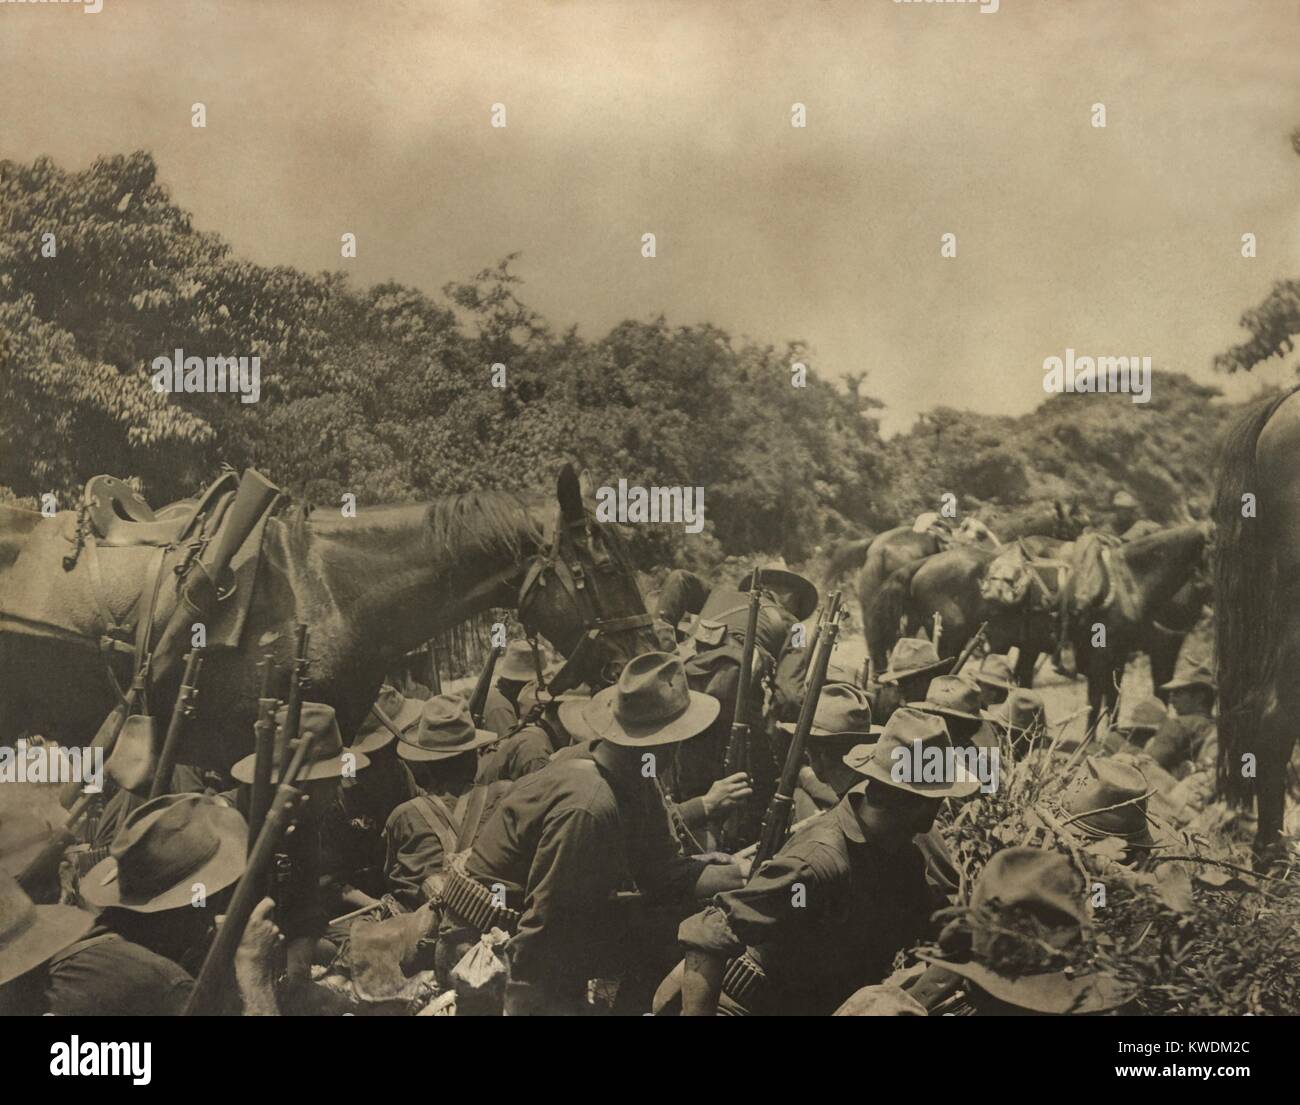 US 16th Infantry under Spanish fire in San Juan creek bottom, during the Battle of San Juan Hill. July 1, 1898, Spanish-American War, during the Siege of Santiago (BSLOC_2017_10_31) Stock Photo